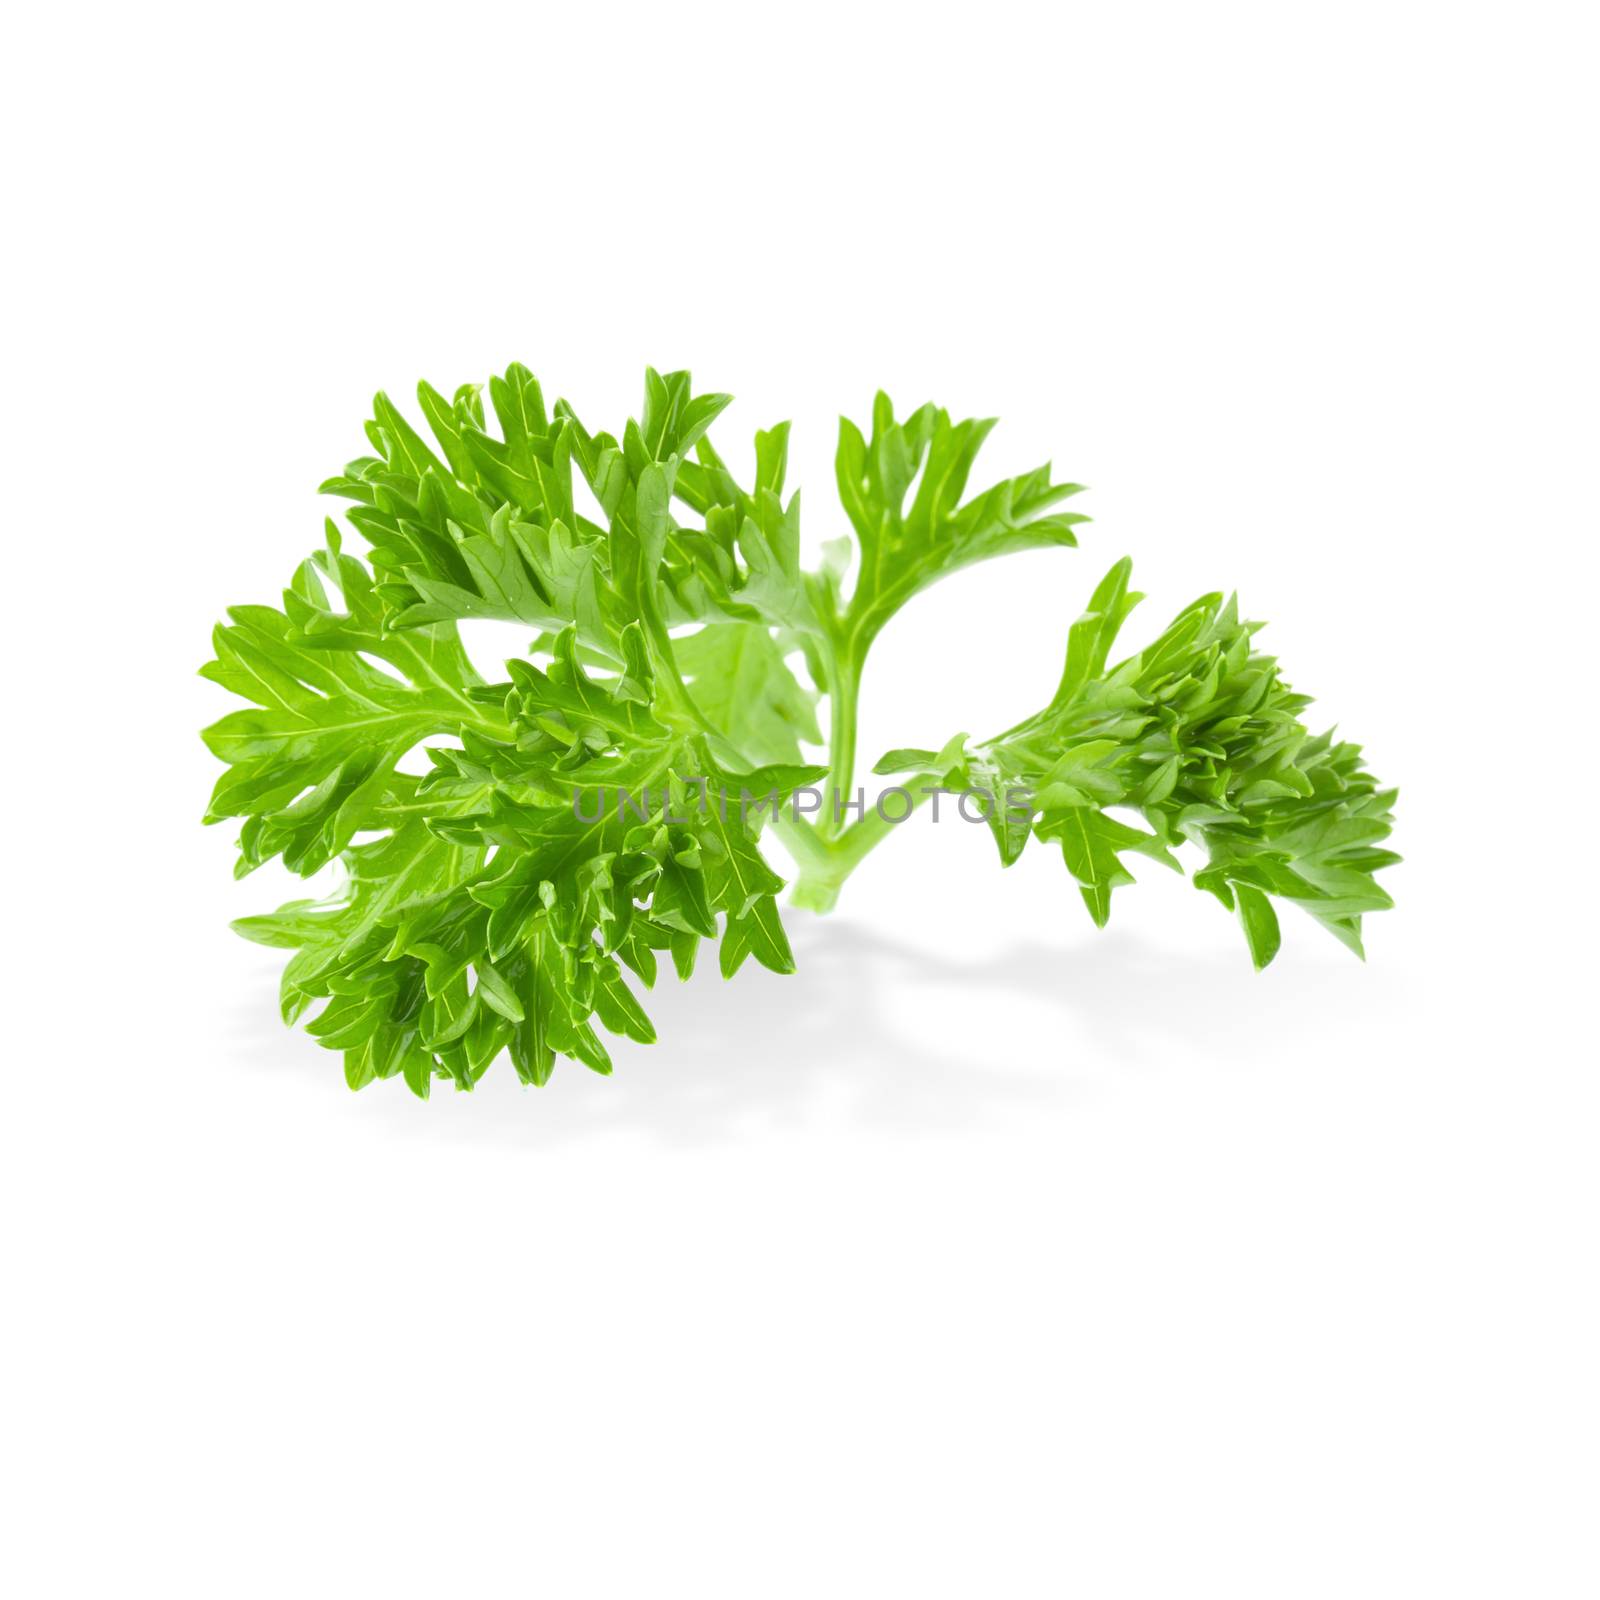 Fresh branch of green parsley natural food isolated on white bac by kaiskynet